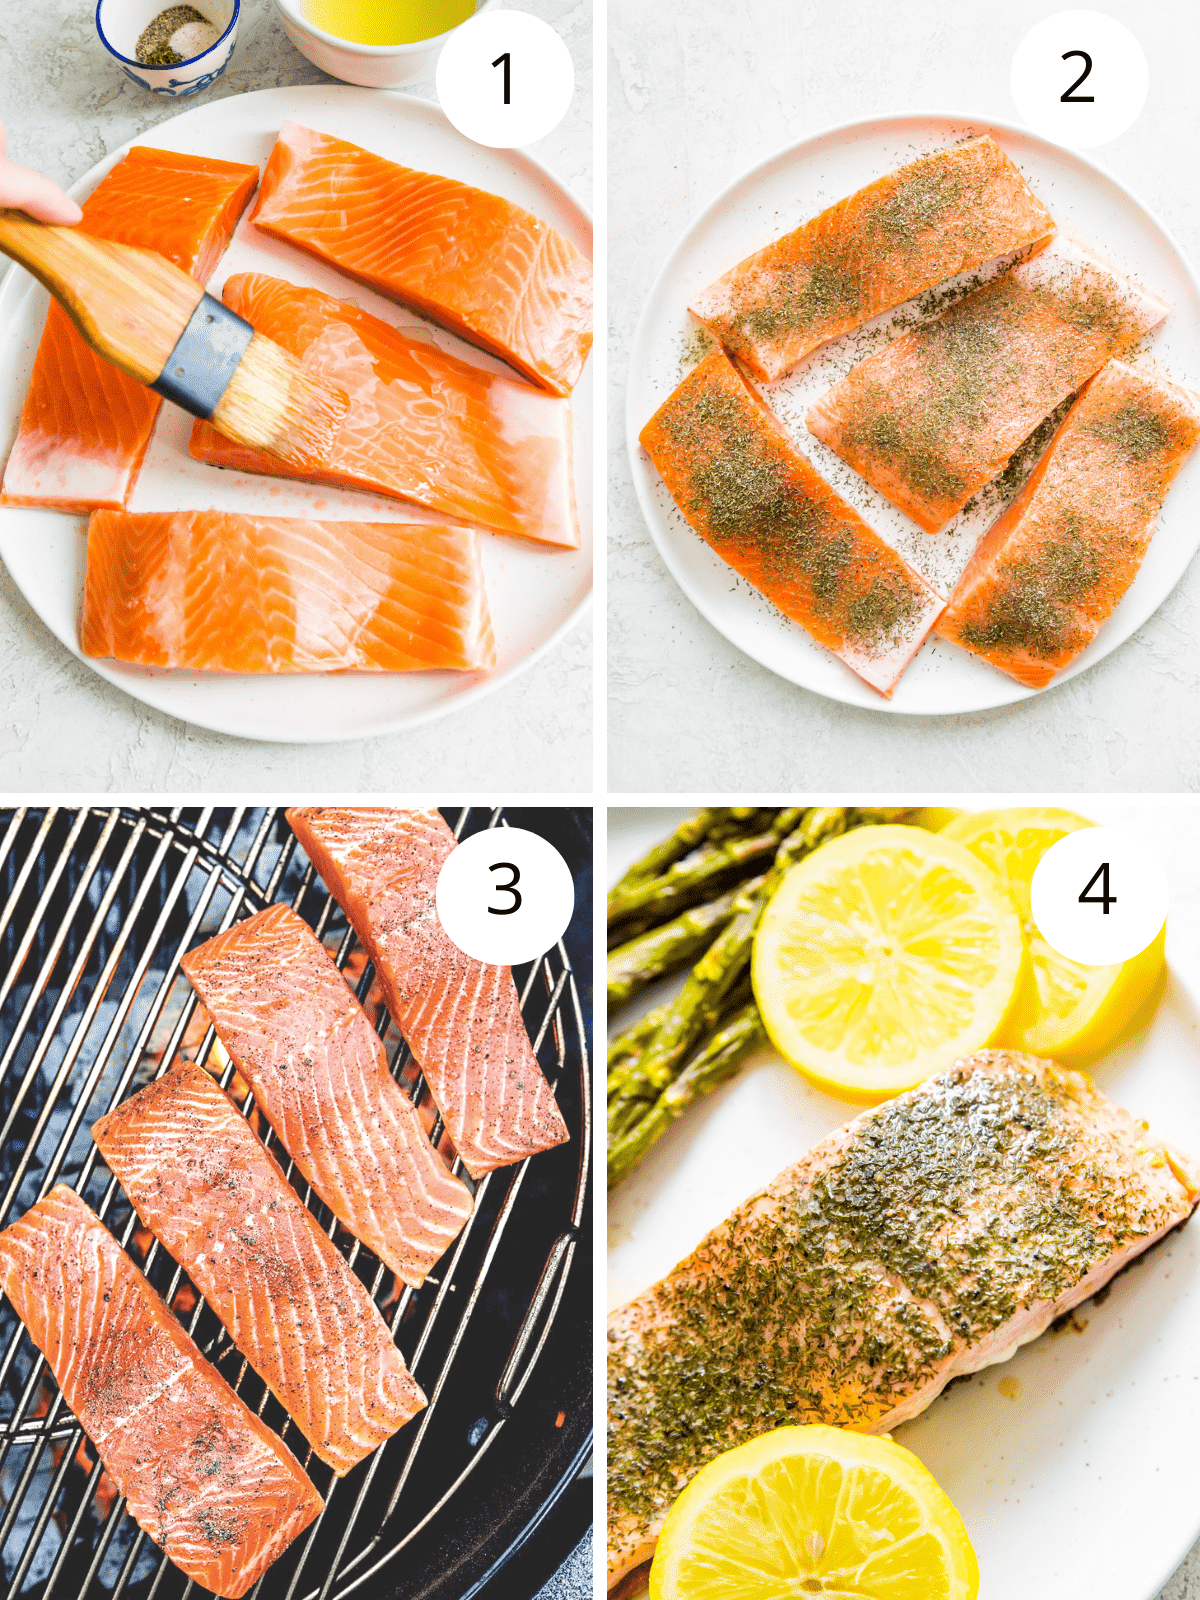 Step by step directions for making grilled Faroe Island Salmon.